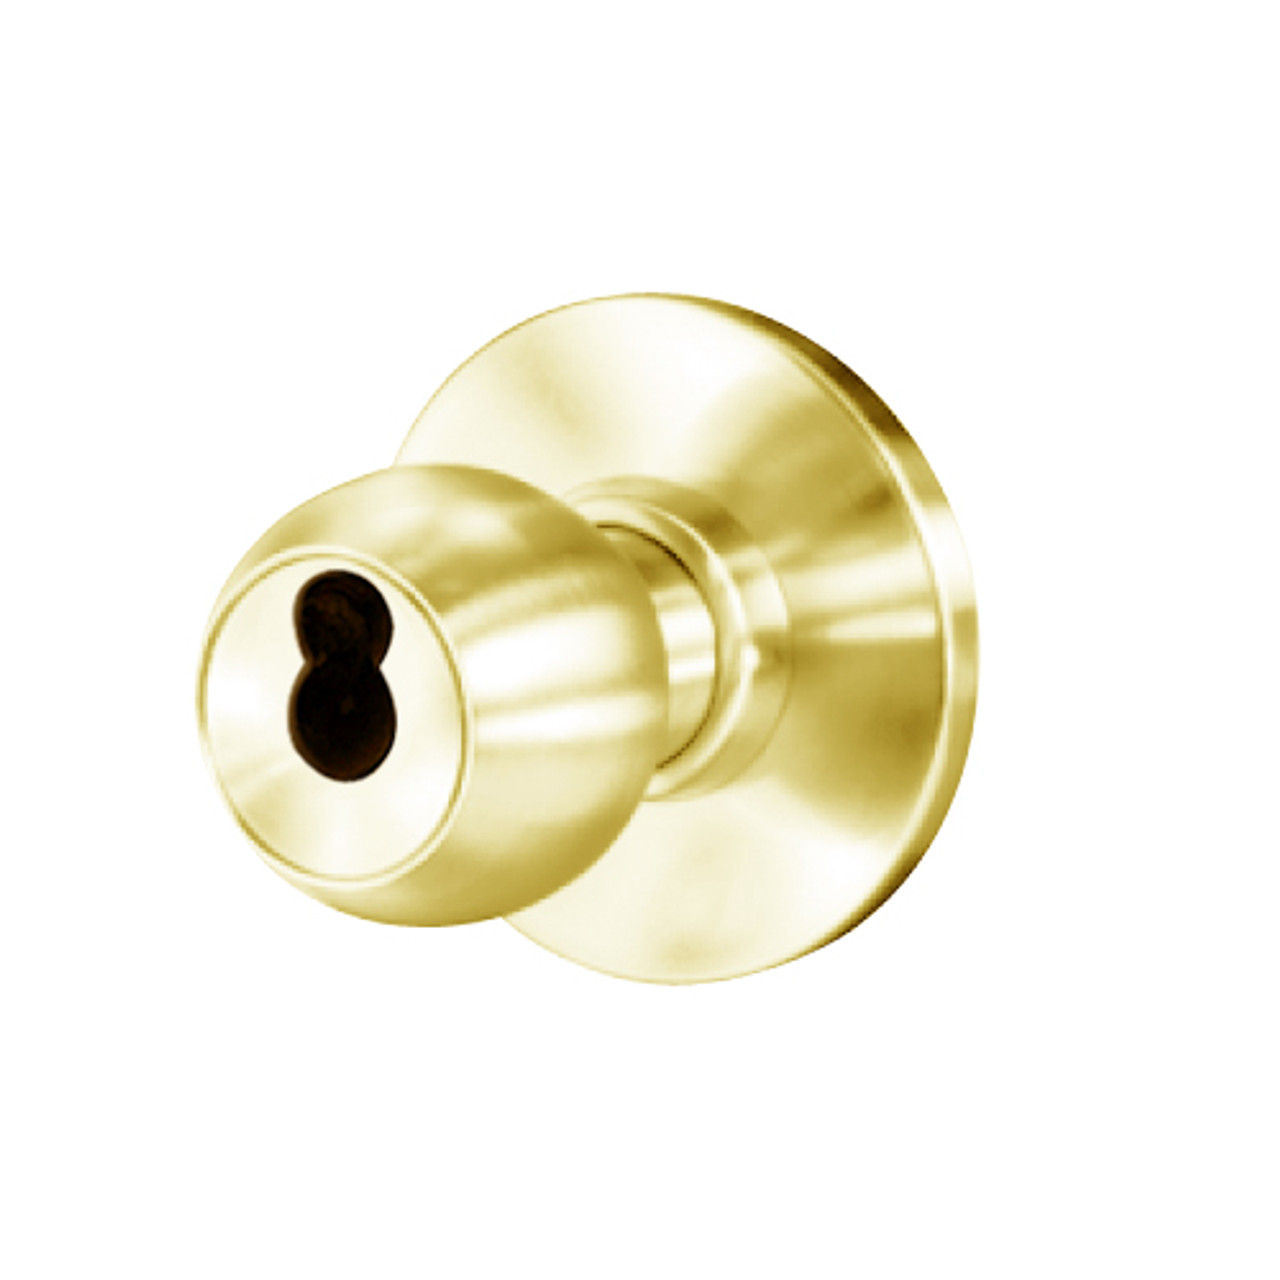 8K57YD4AS3605 Best 8K Series Exit Heavy Duty Cylindrical Knob Locks with Round Style in Bright Brass